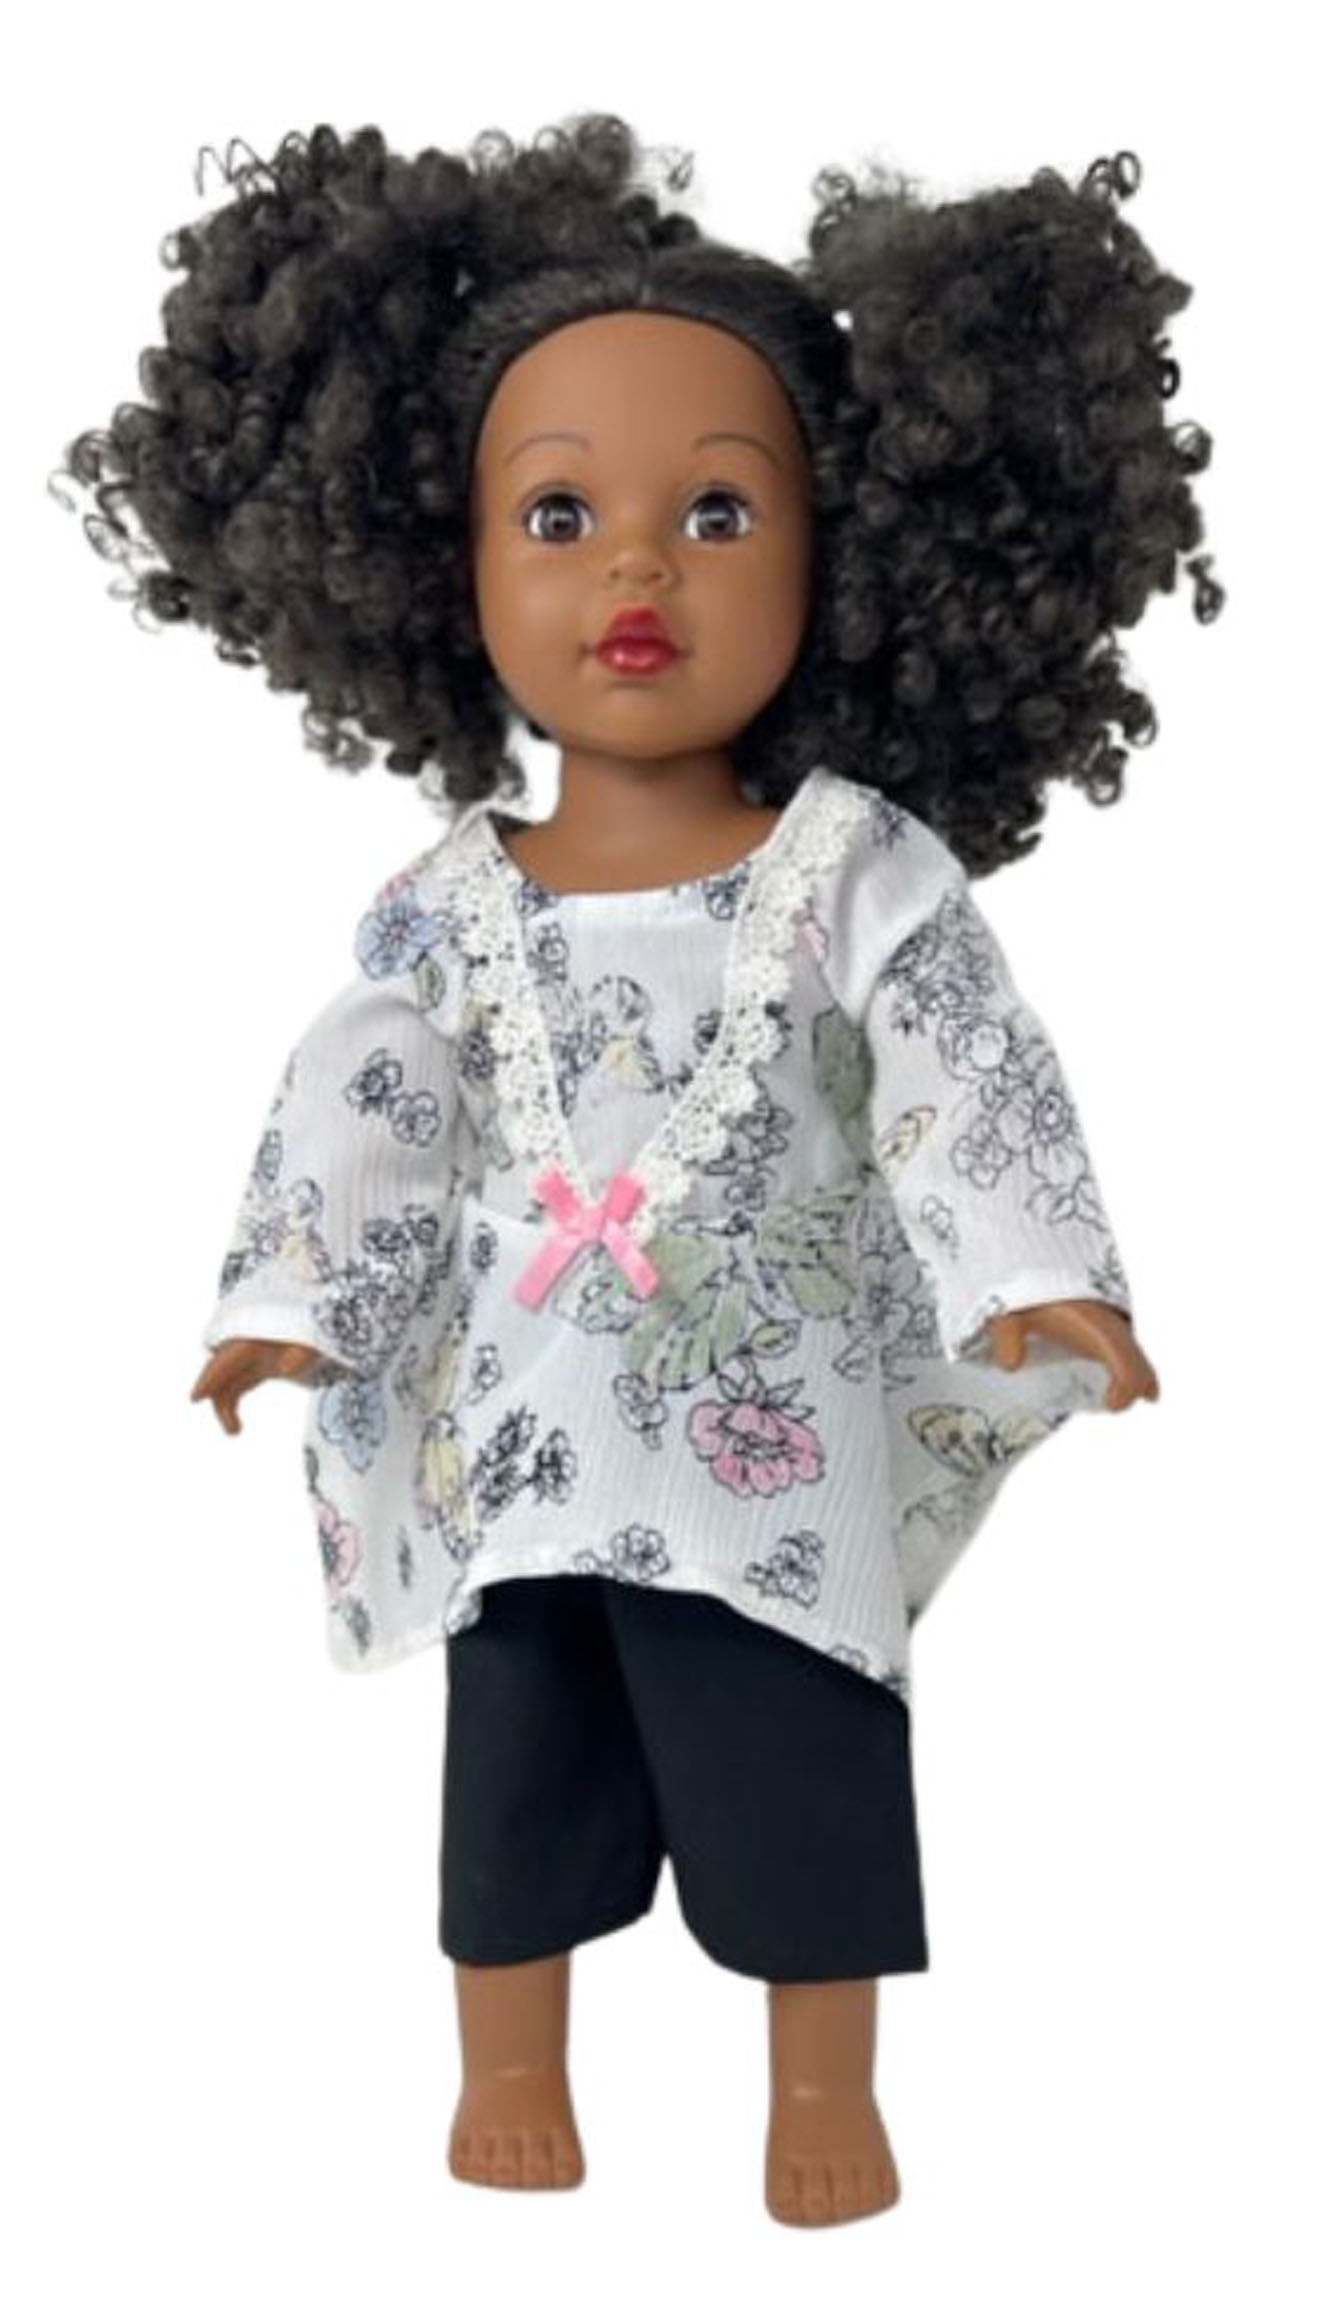 Doll Clothes Superstore Stylish Pants And Top Fits 18 Inch Girl Dolls Like Our Generation 